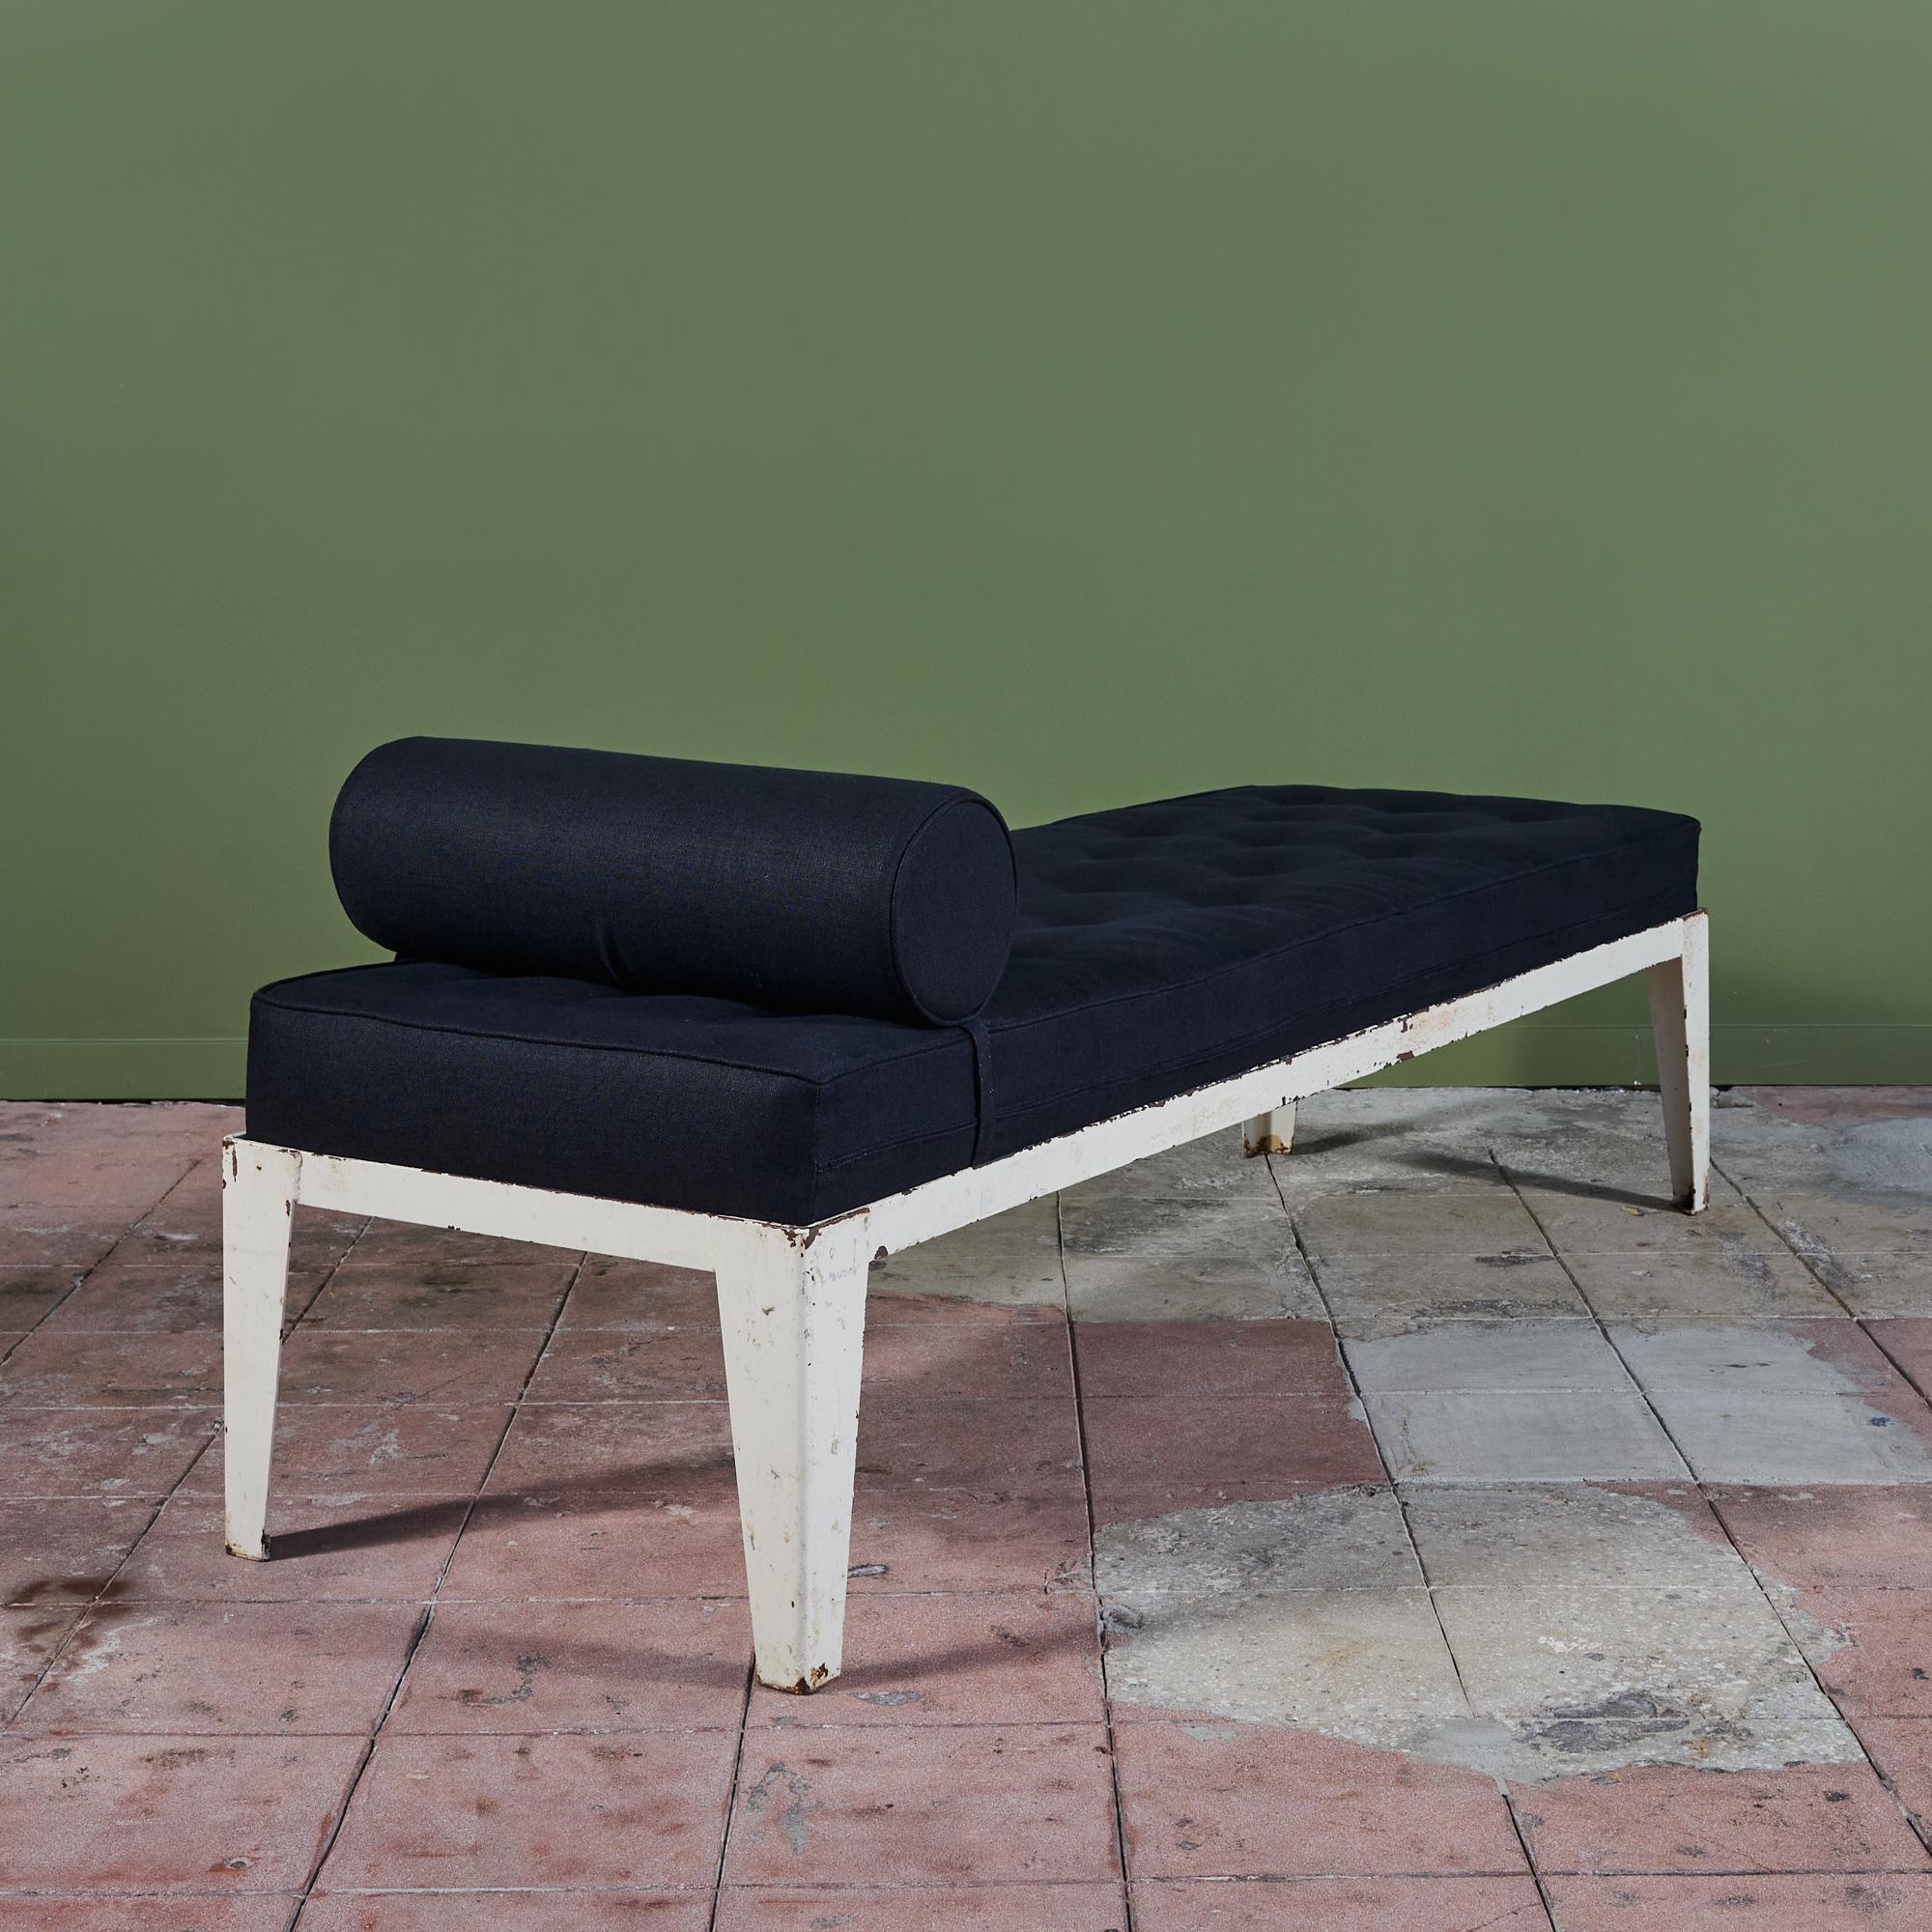 20th Century Patinated Metal Daybed with Tufted Cushion